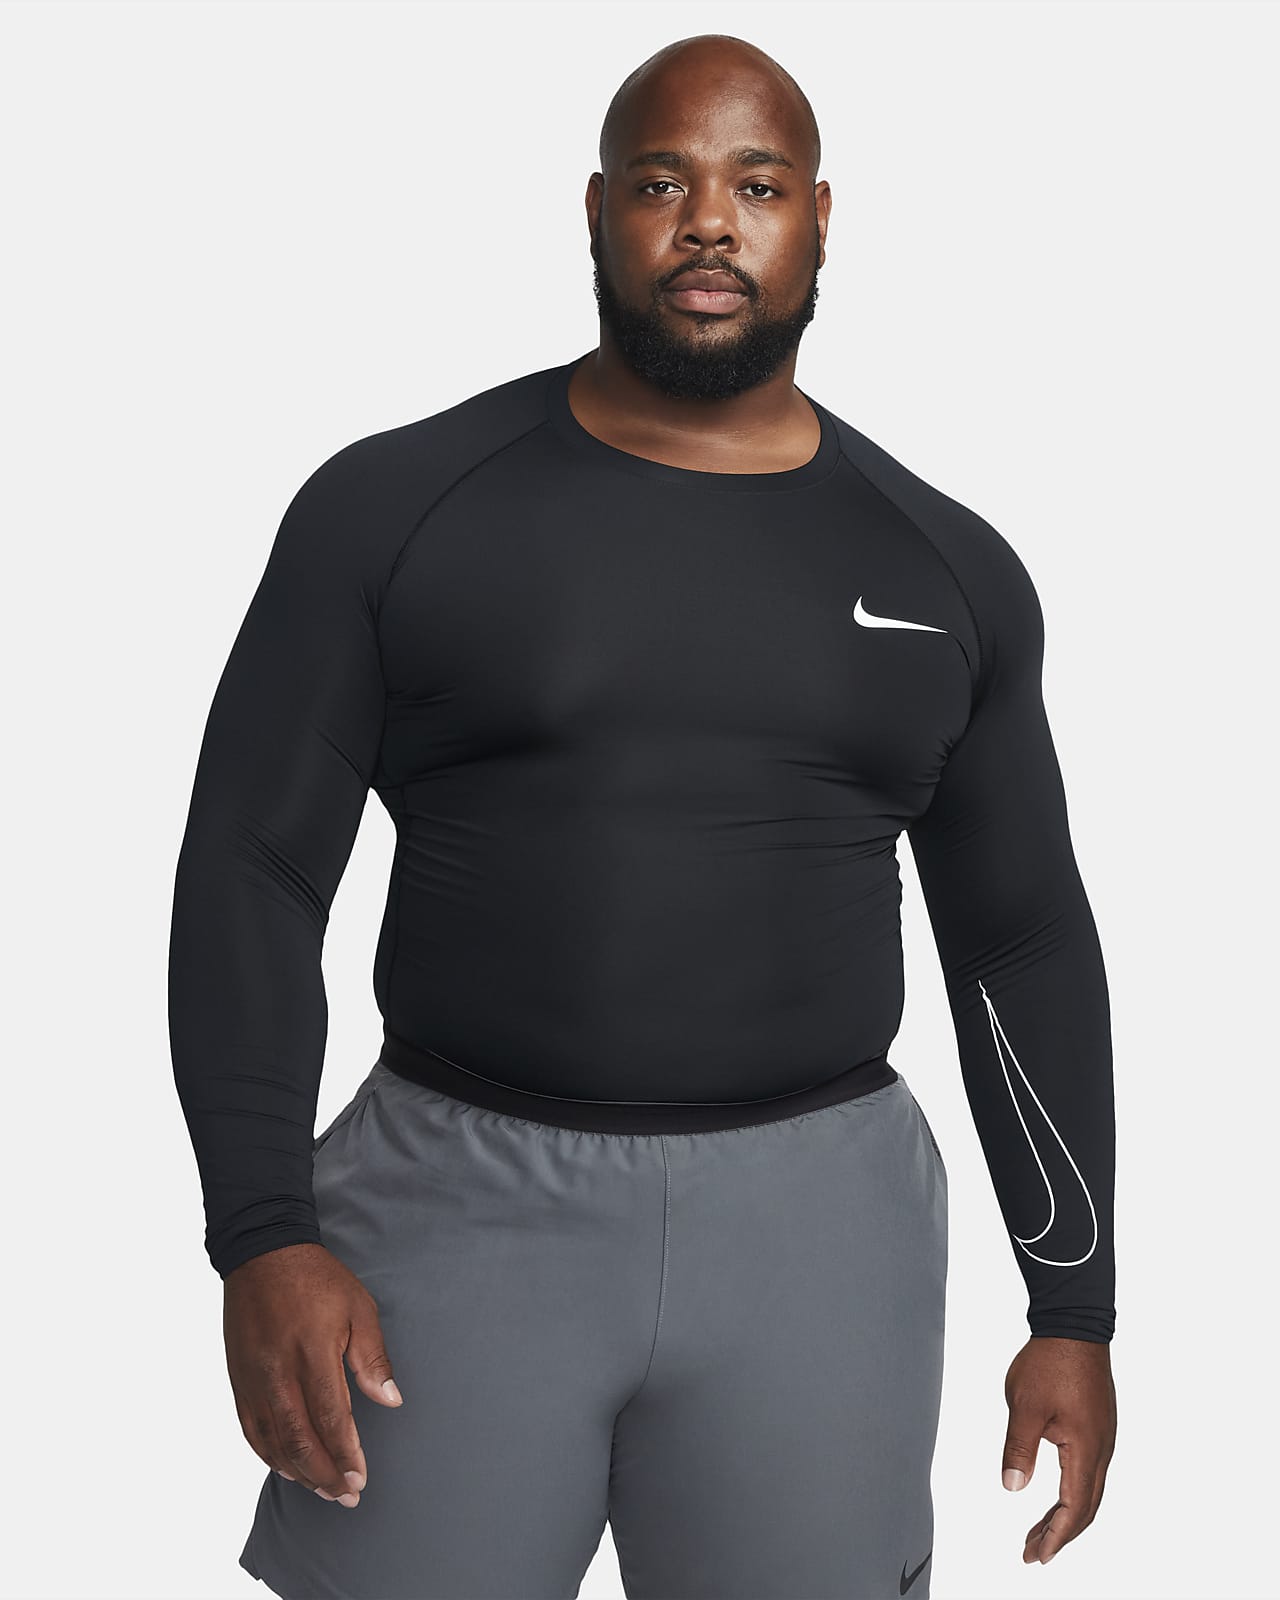 https://static.nike.com/a/images/t_PDP_1280_v1/f_auto,q_auto:eco/61277b03-1c05-469d-9b9f-945d3469aa82/pro-dri-fit-tight-fit-long-sleeve-top-TVh6HF.png